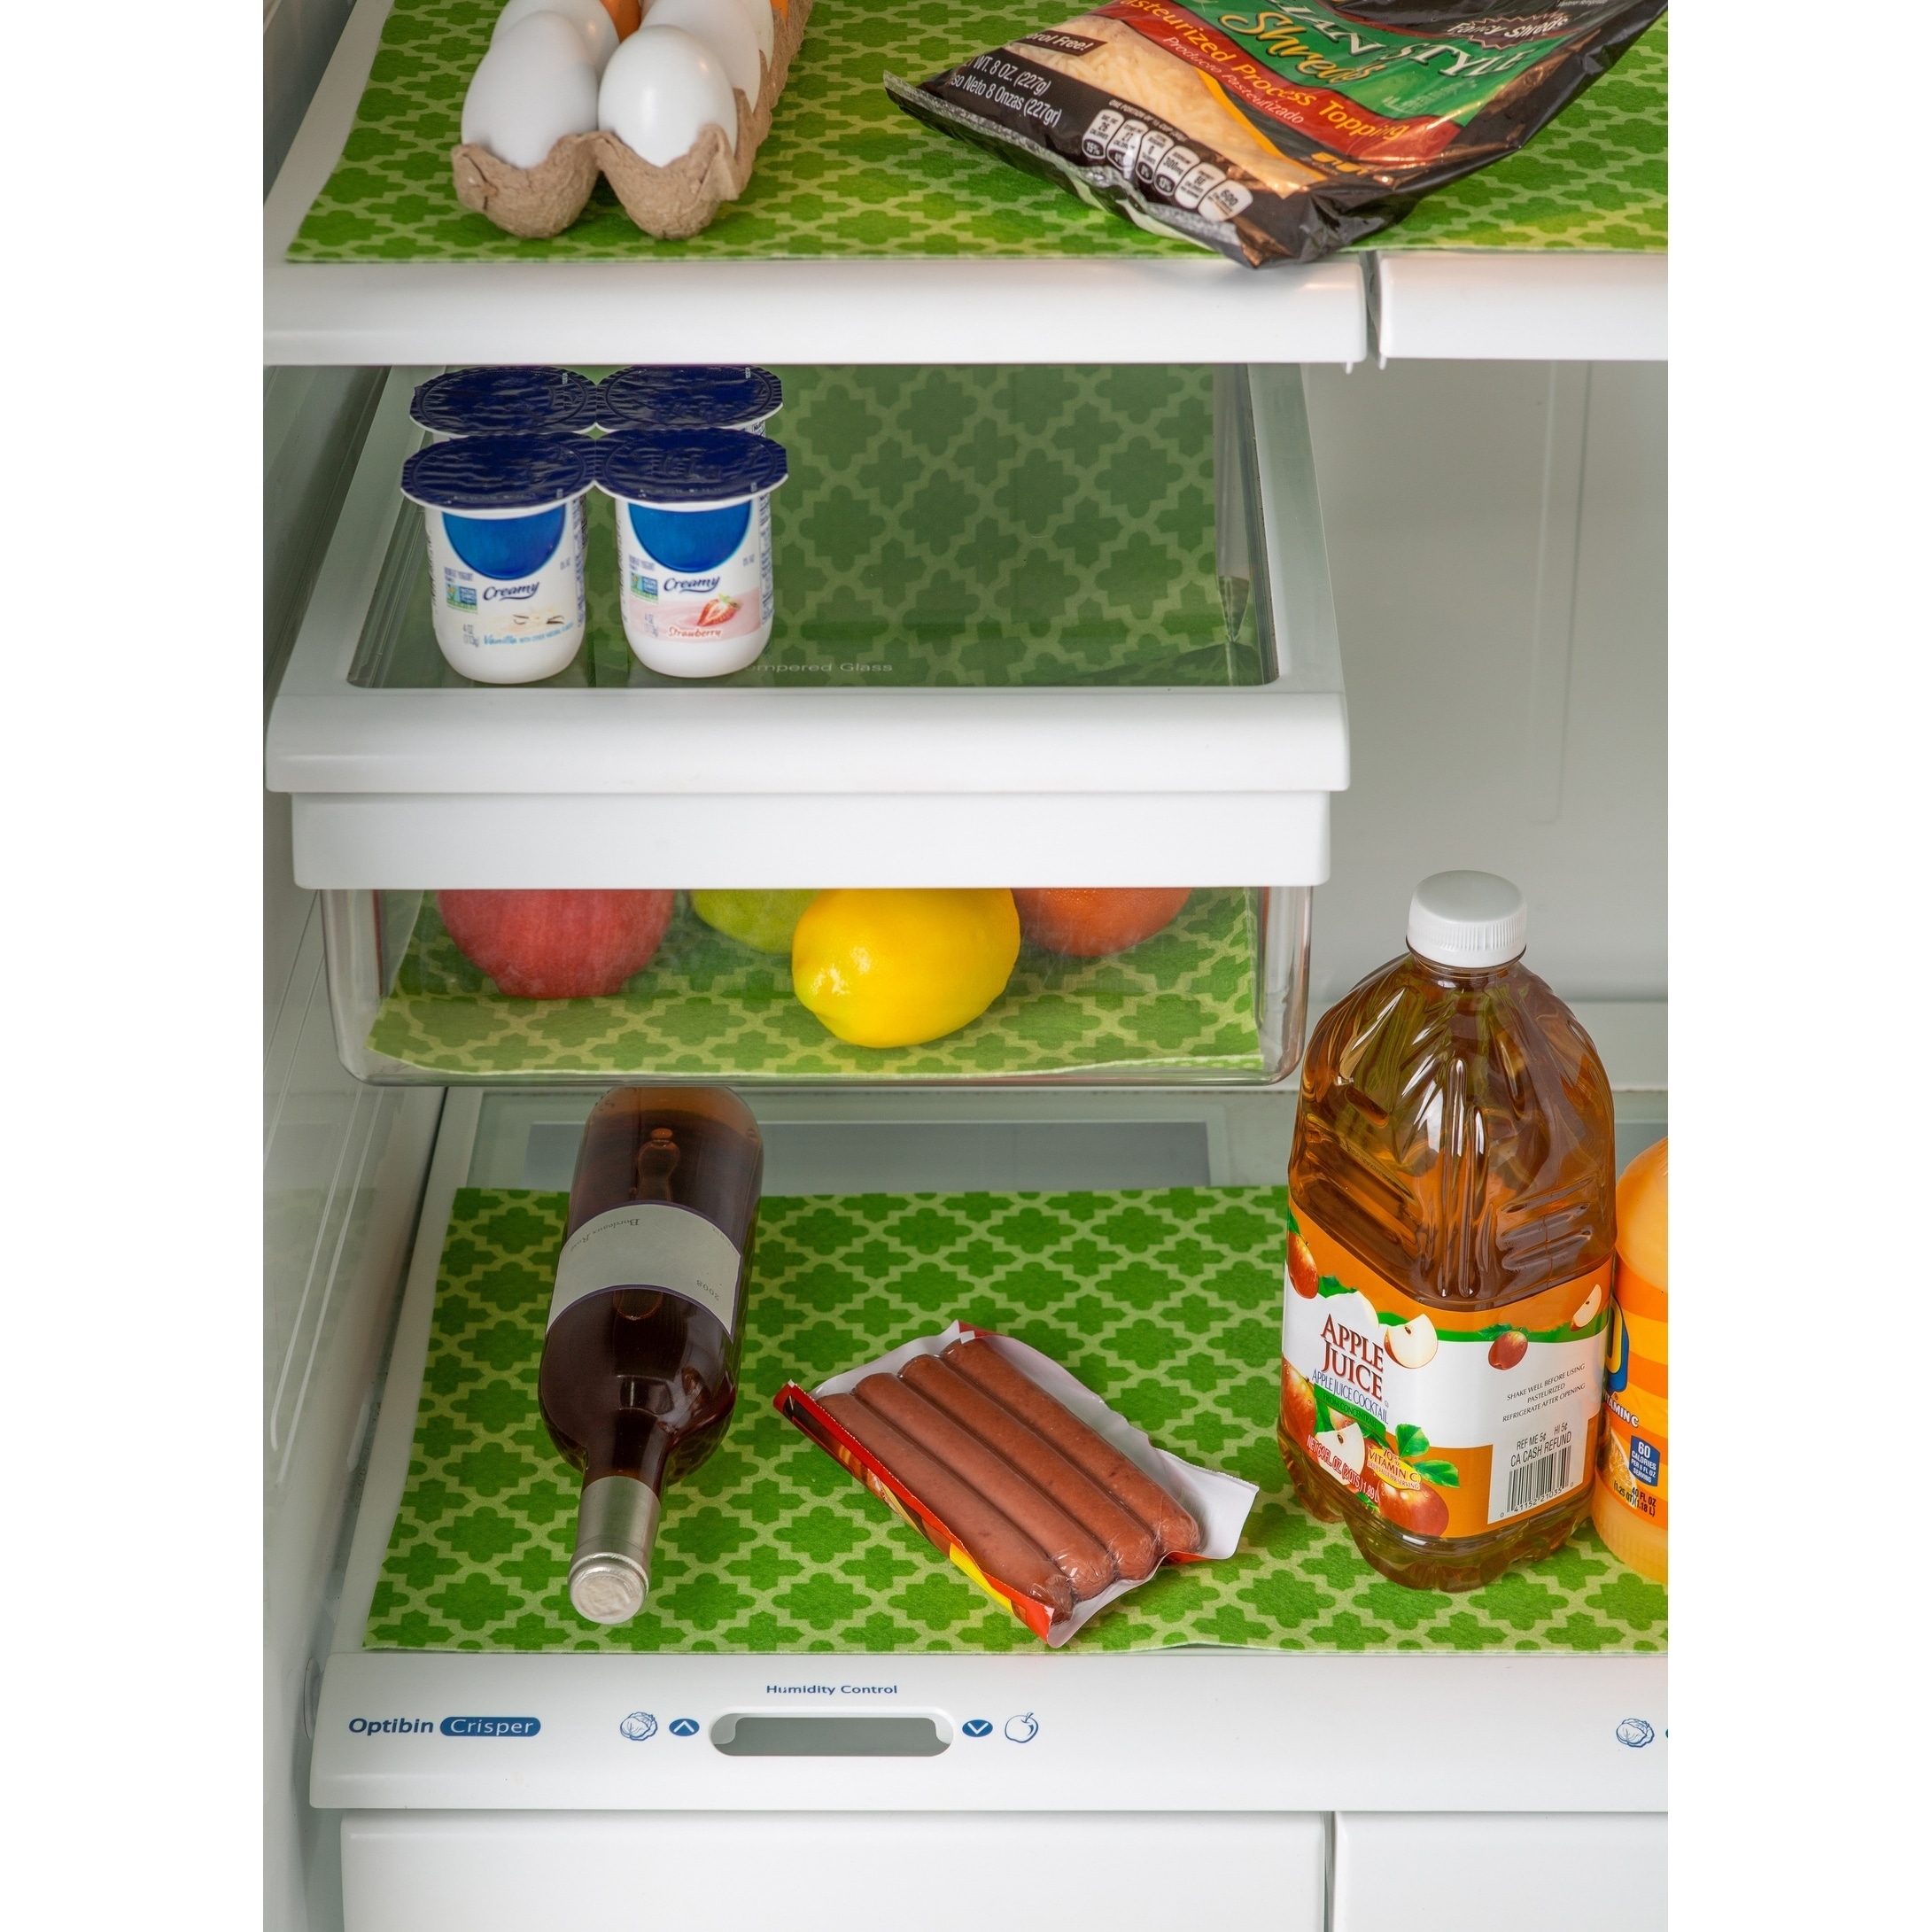 AKINLY 9 Pack Refrigerator Mats,Washable Fridge Mats Liners